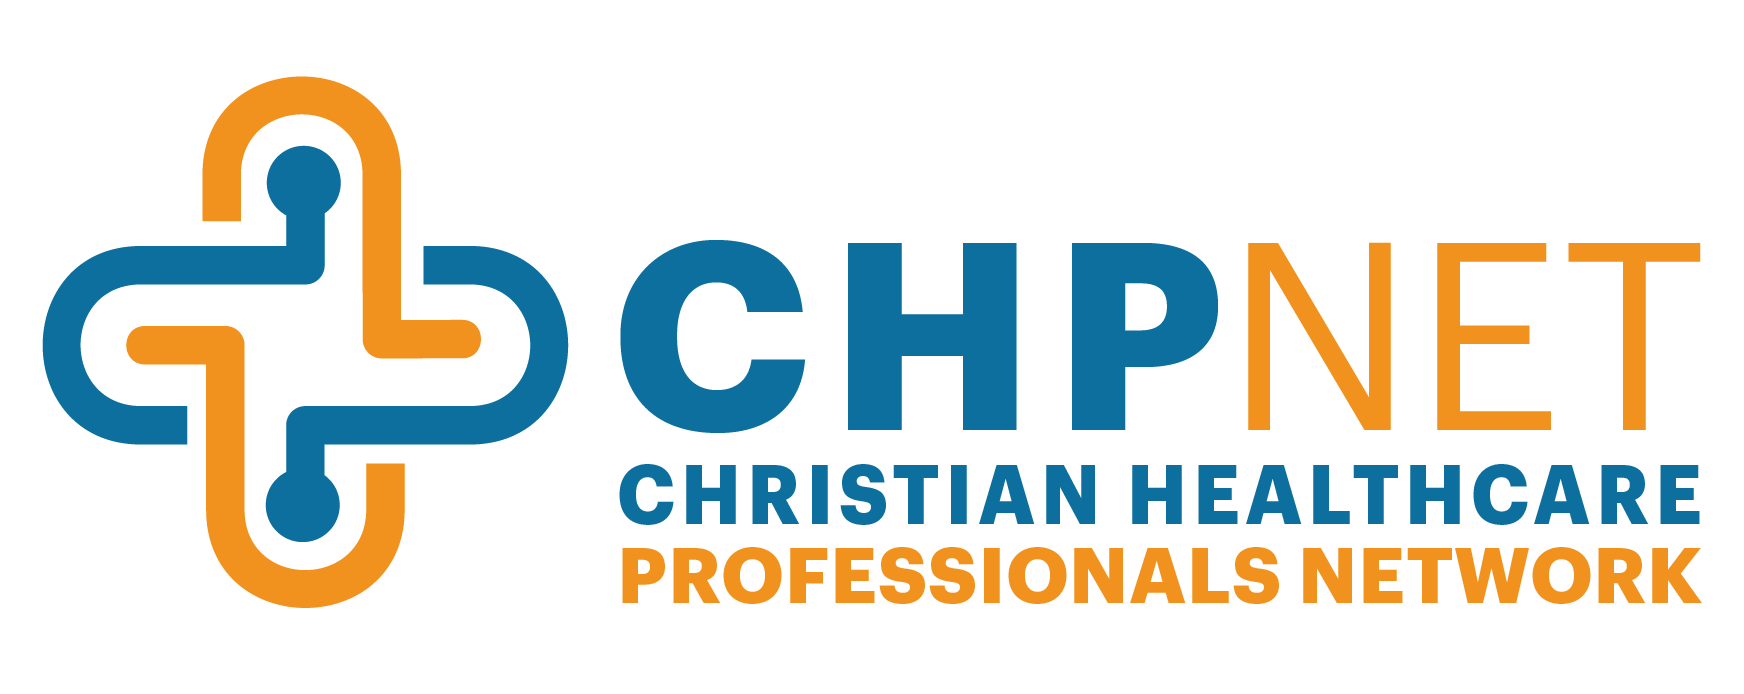 Christian Healthcare Professionals Network